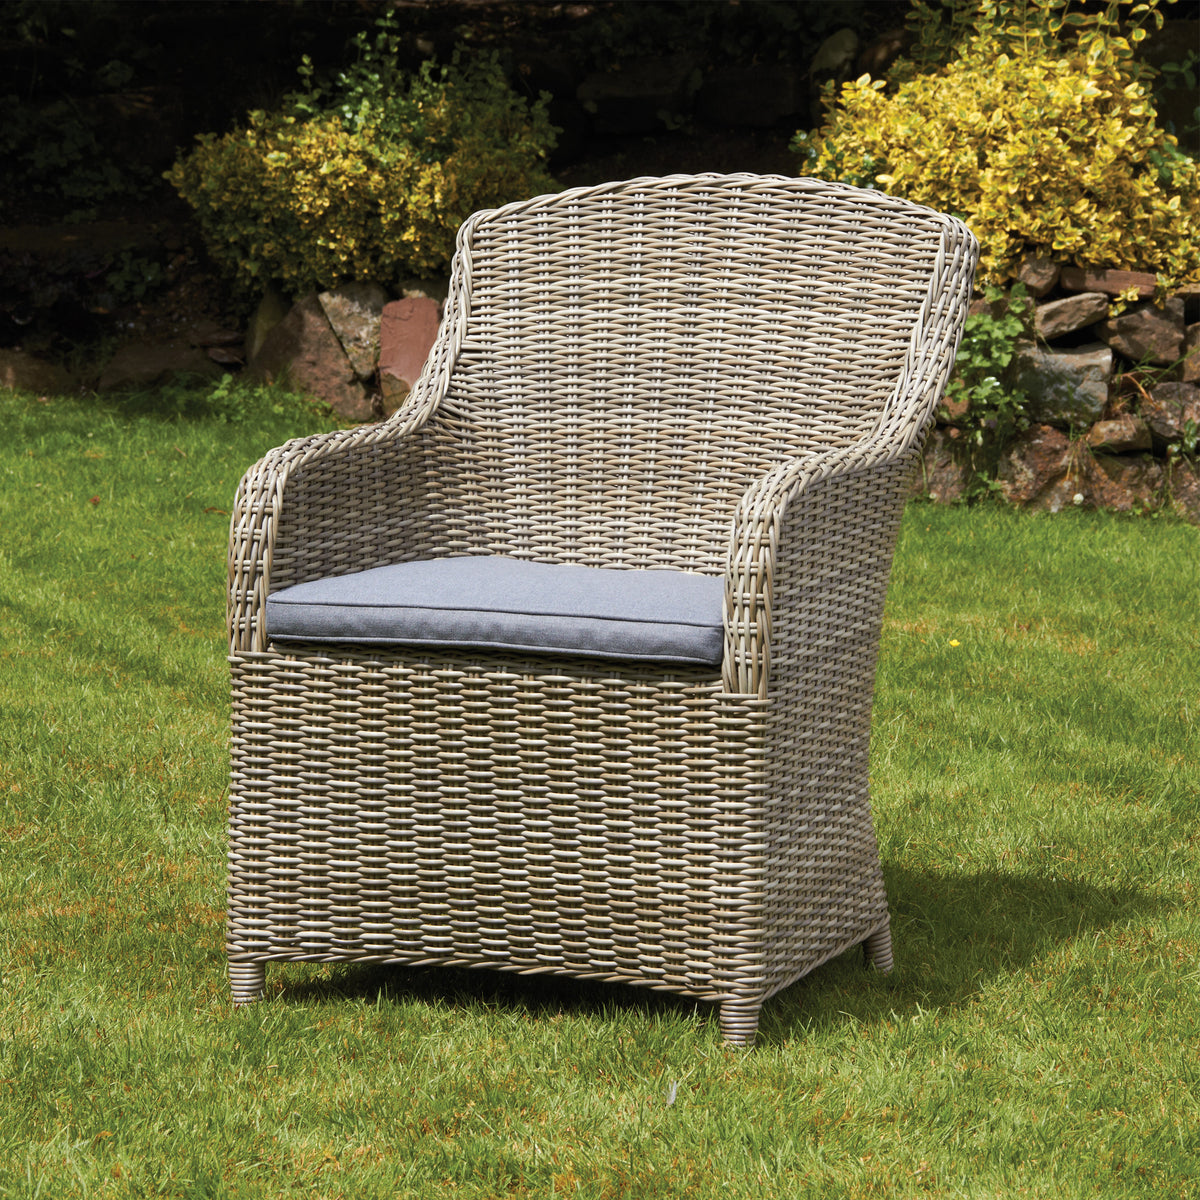 Wentworth Imperial Chair